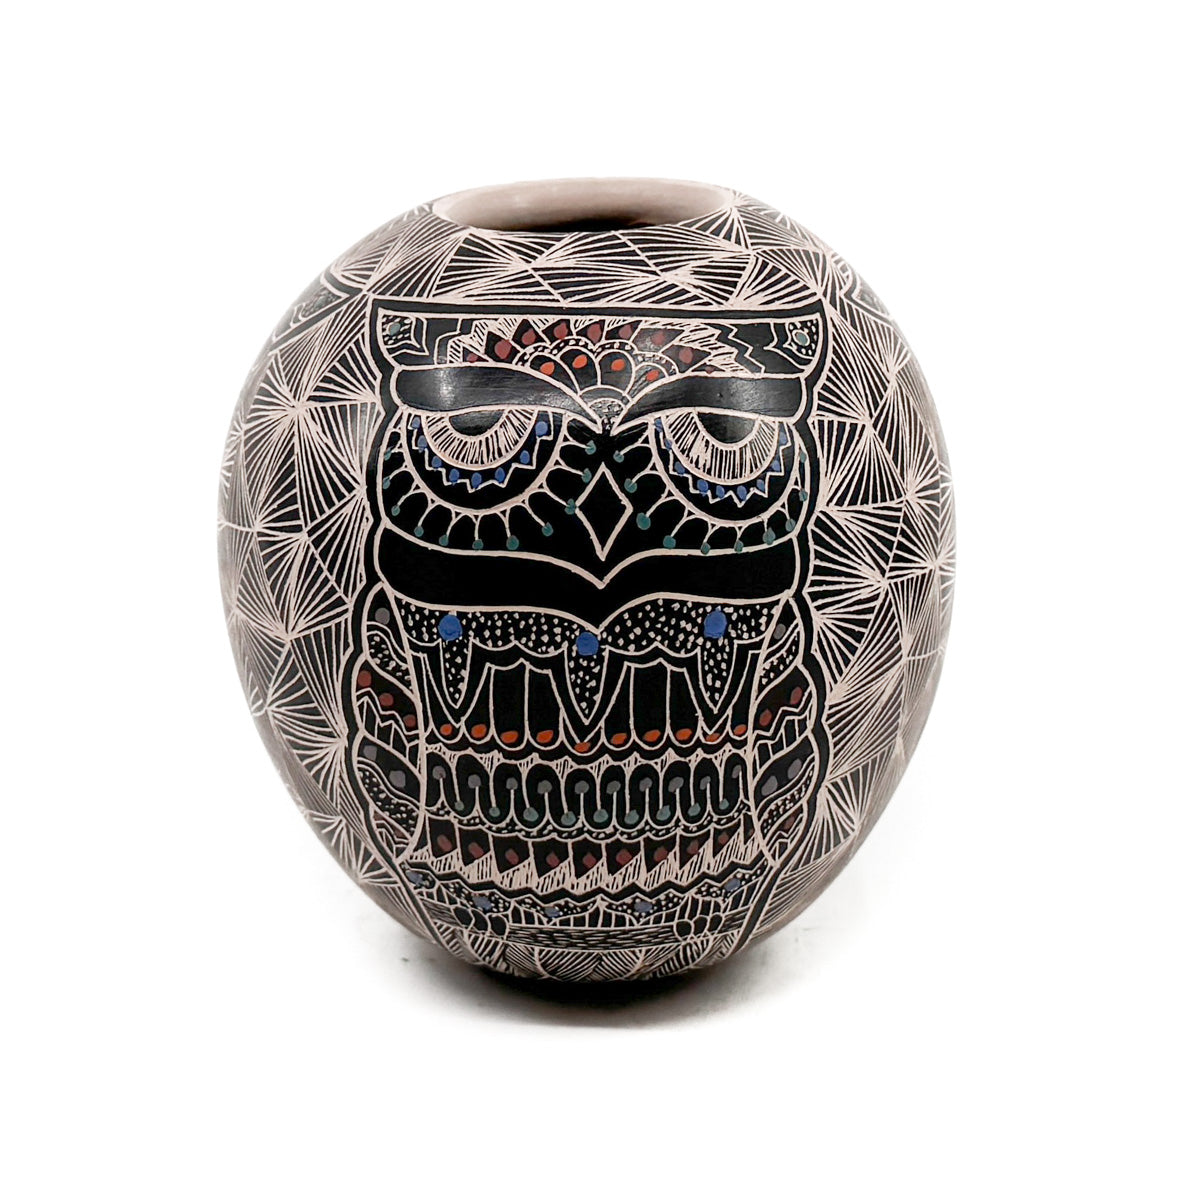 Load image into Gallery viewer, Handcrafted pot by Mata Ortiz artist Ailadi Mijarez Polychrome jar decorated with sgraffito and painted owl and geometric design Measures approximately 4.75 inches high x 4.25  inches in diameter at widest circumference
